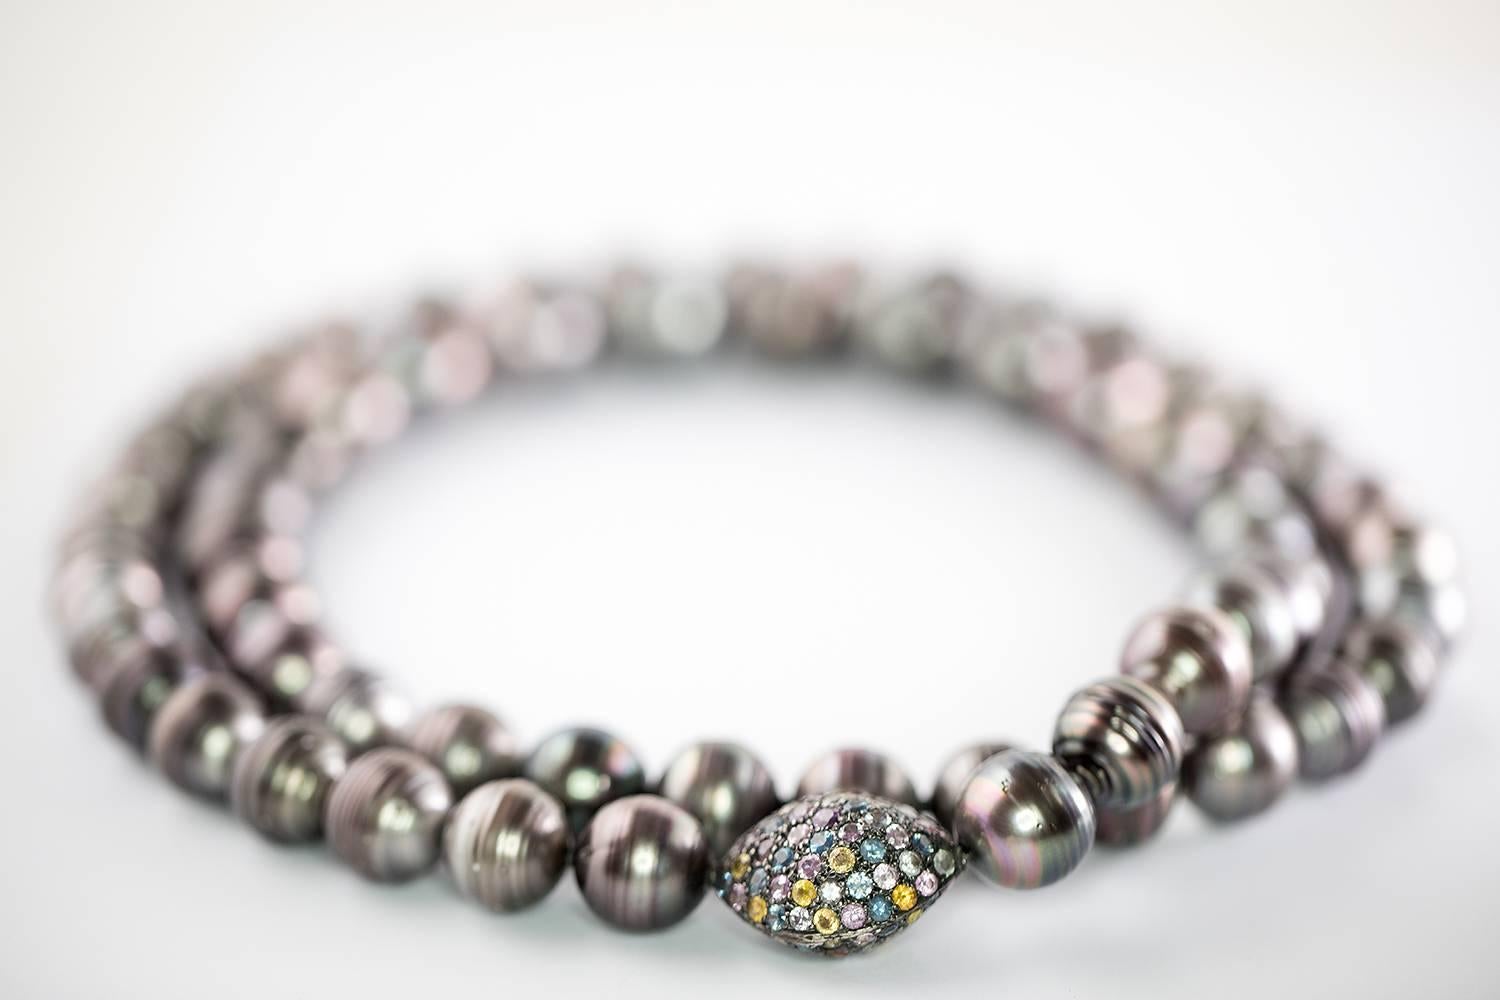 Round Off Shape, One of a Kind, Black Tahitian Cultured Pearls 15 - 17.5mm of blue and pink overtones and high luster set as a Long Necklace 100cm featuring an oval 925 Sterling Silver bead pavé with multi colored natural Sapphires of blue, pink,